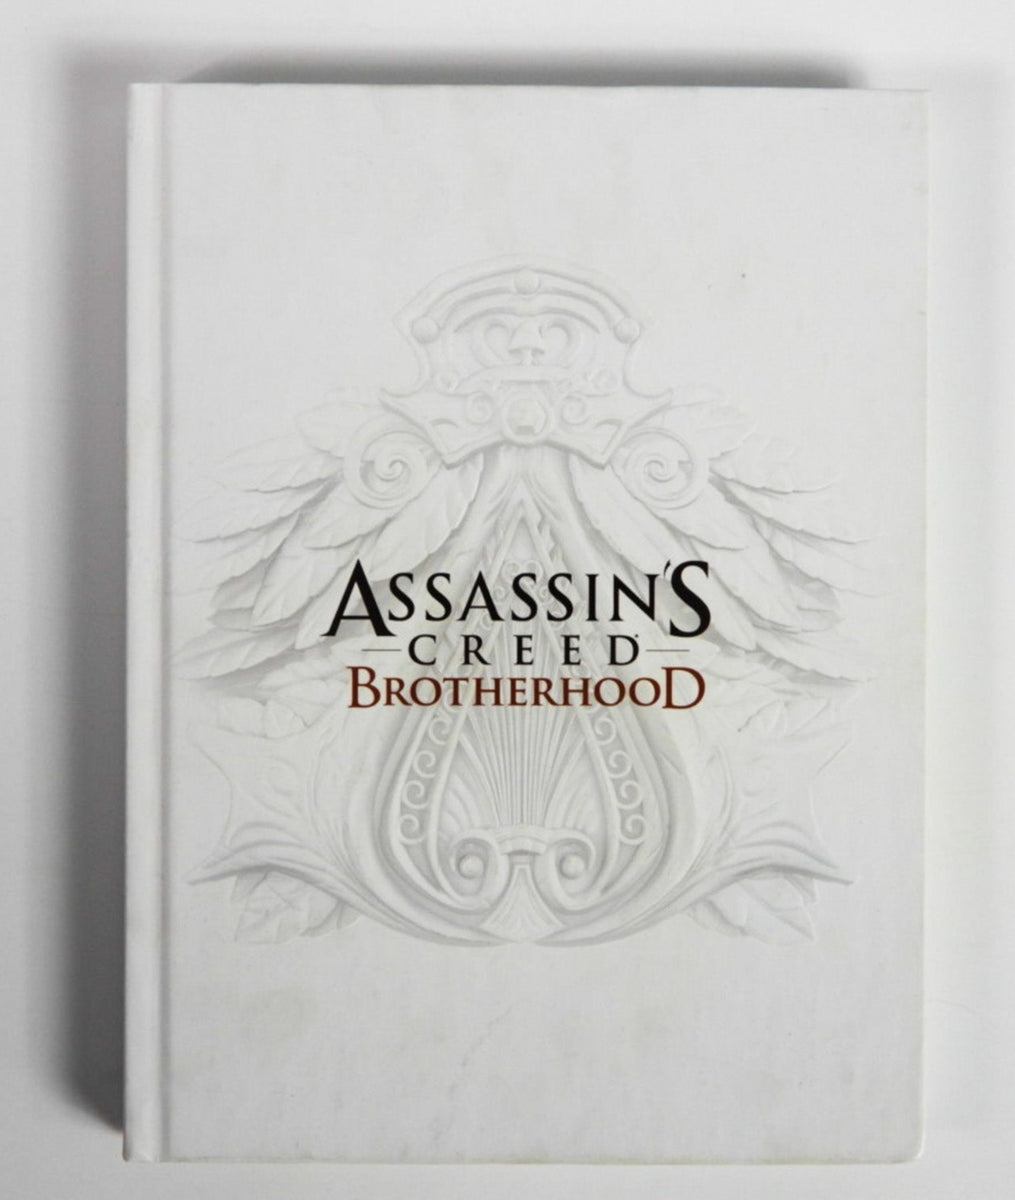 Video Game Guide Books. Items include Assassin's Creed Brotherhood, The  Legend of Zelda Twilight Princess, Resistance 2 and Dante's Inferno. Four  items. - Bunting Online Auctions